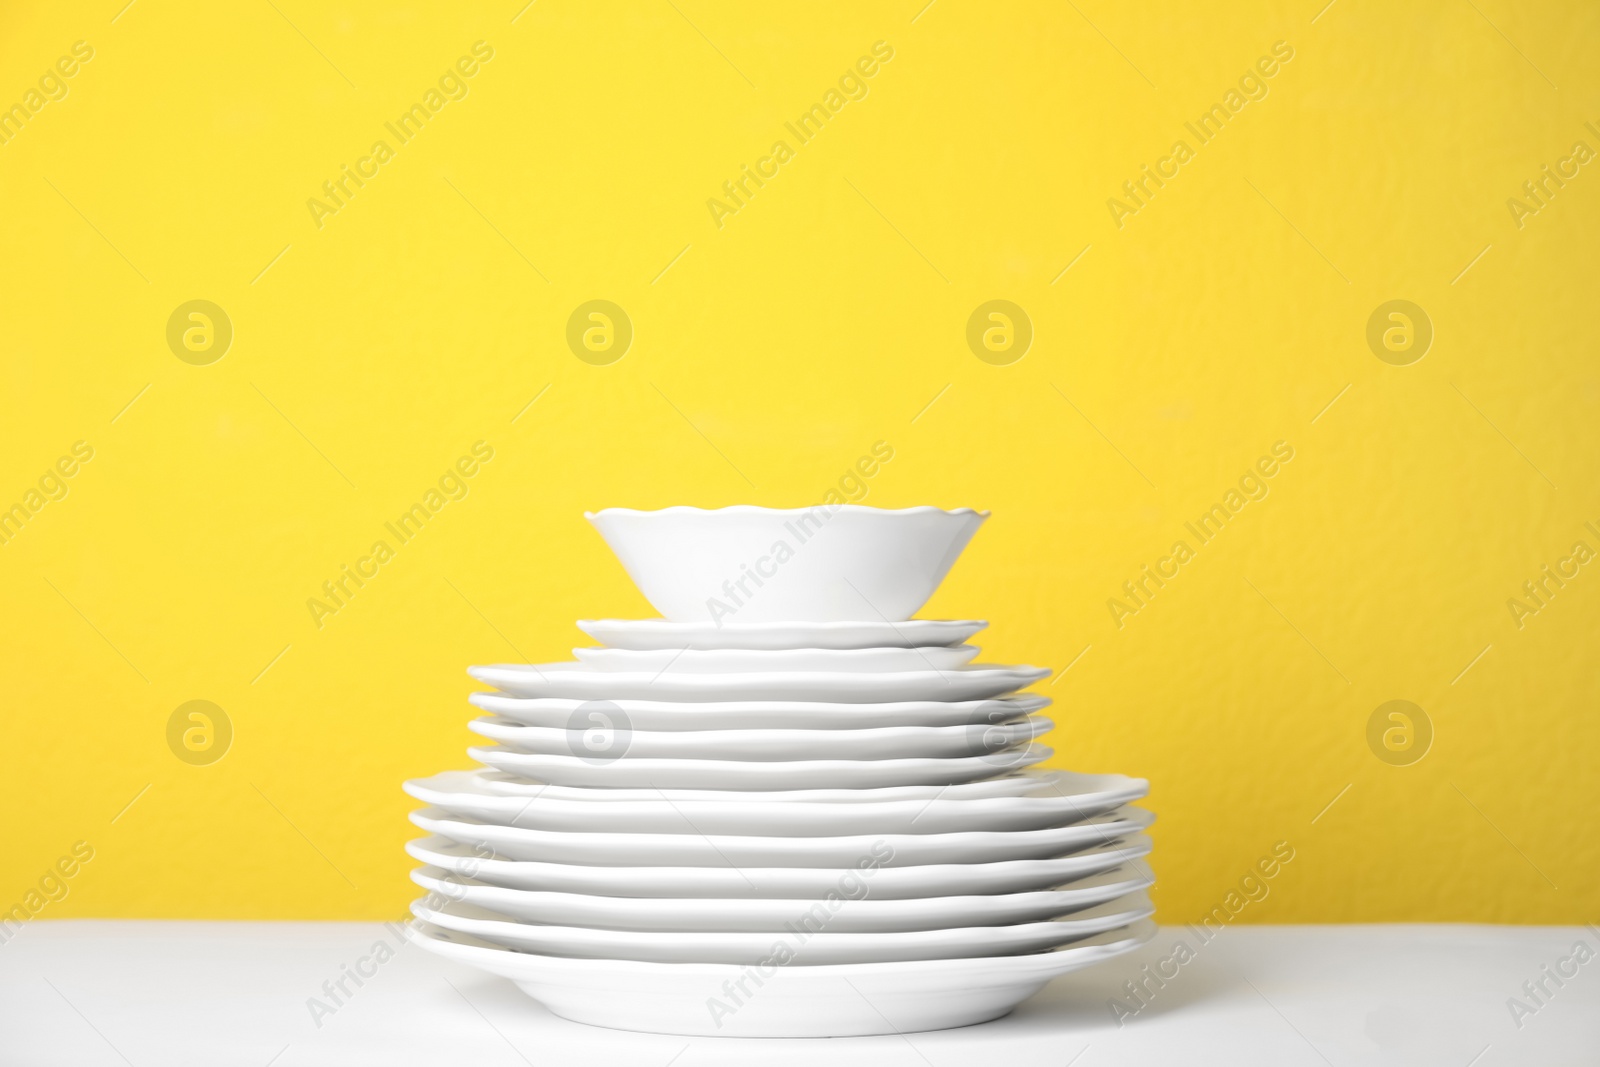 Photo of Stack of clean plates on white table against yellow background